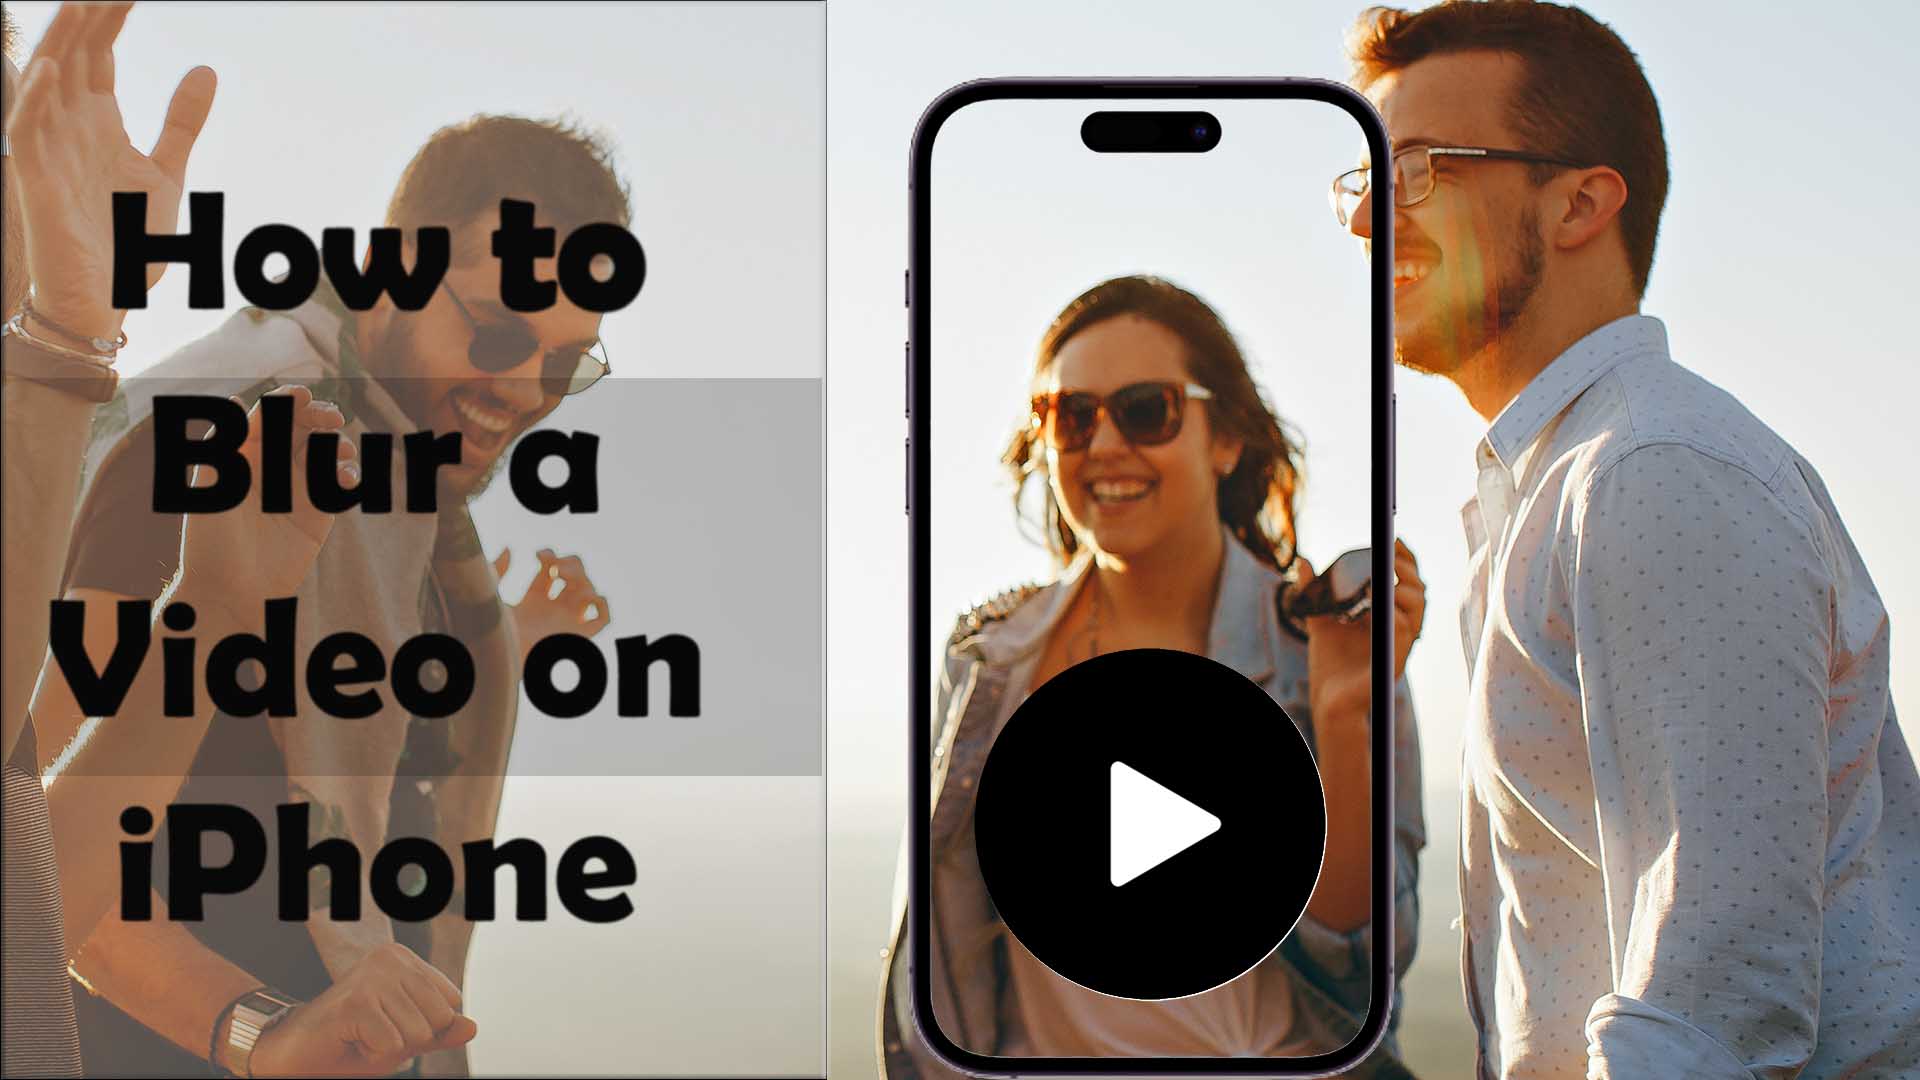 How to Blur a Video on iPhone | Step-by-step Guide